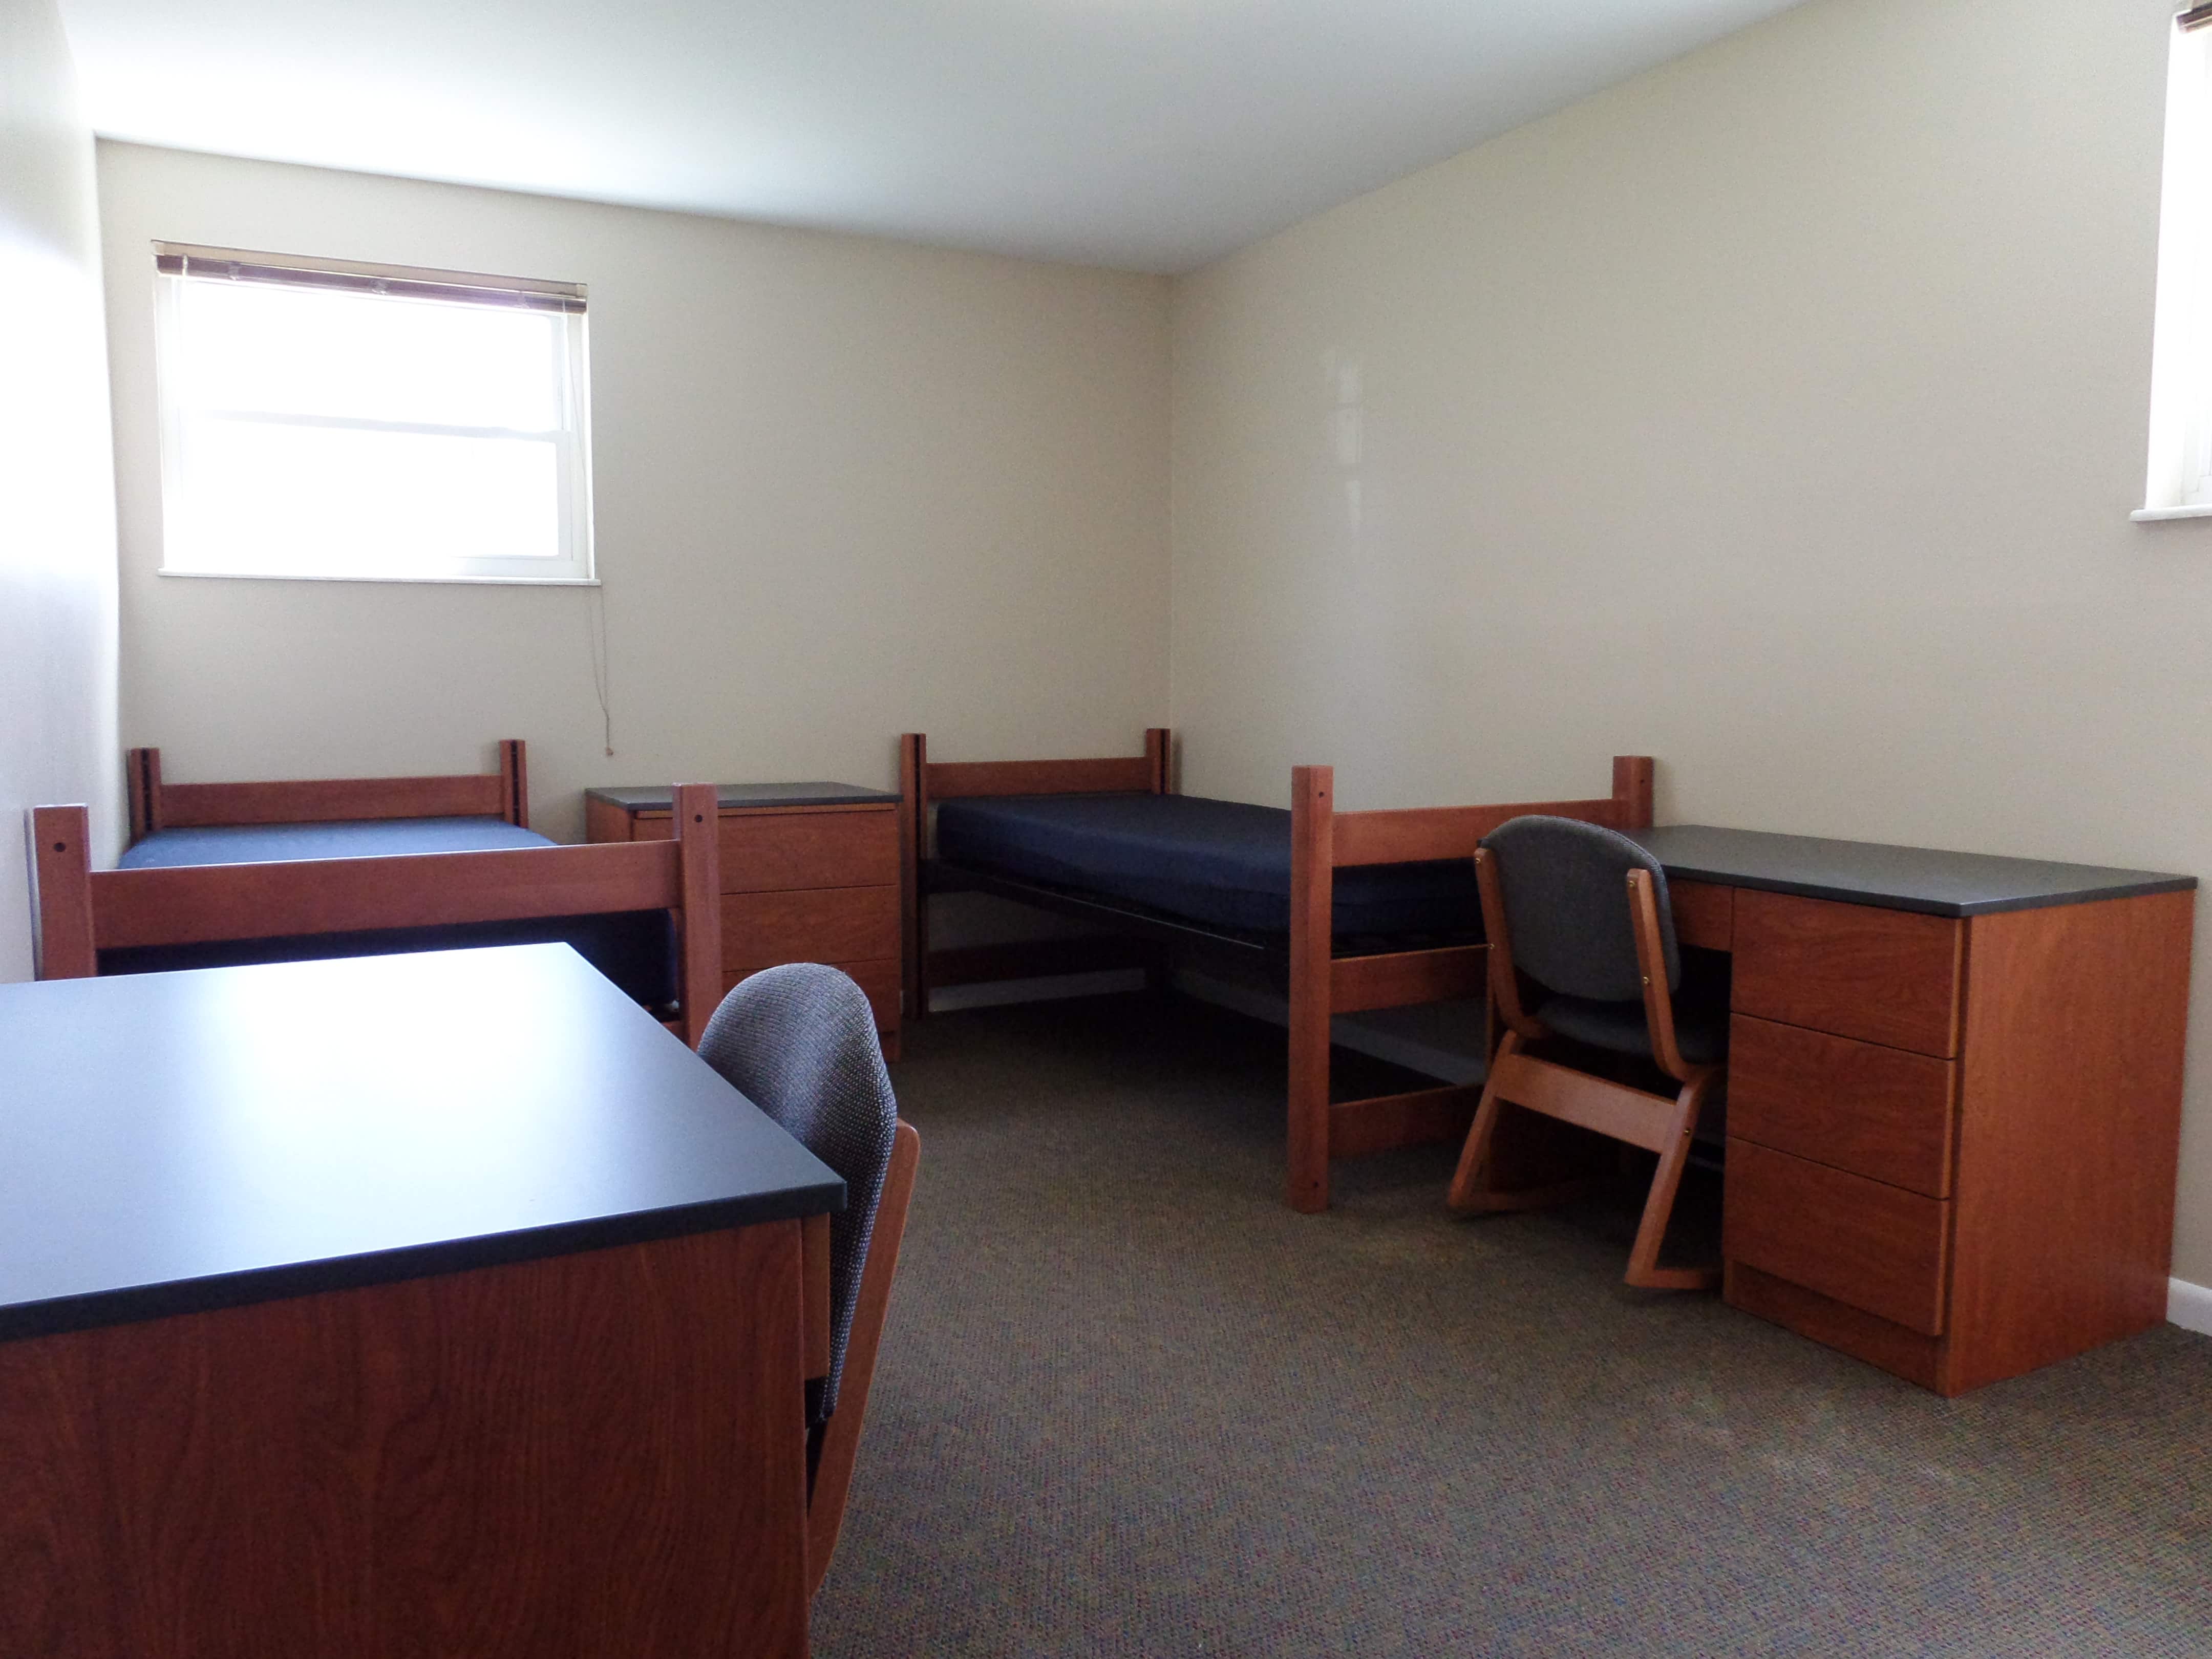 Double room apartment with extra-long twin beds (80”), study table and desk chair